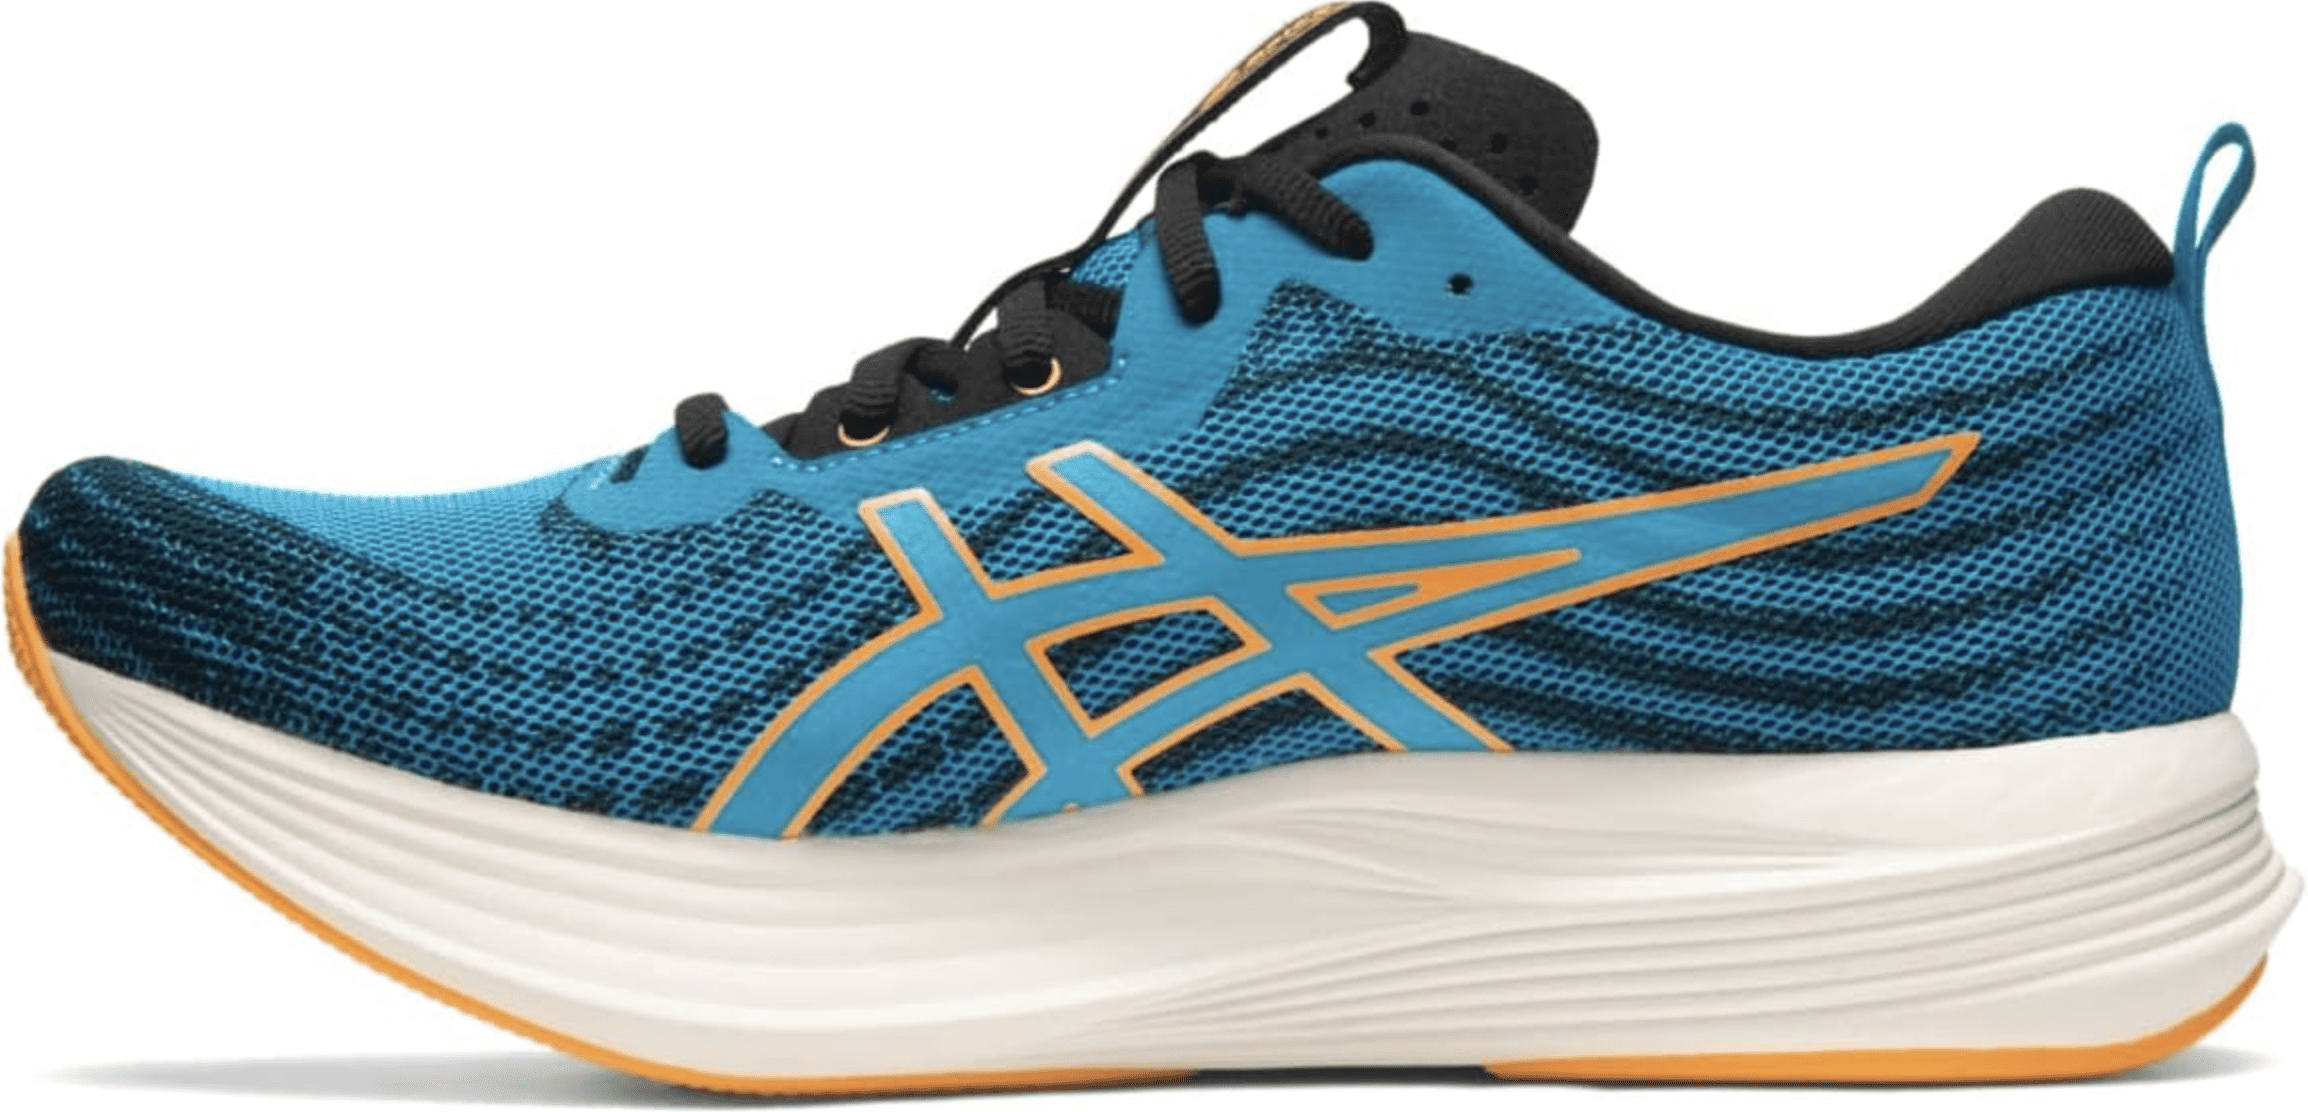 Best Asics for Hallux Rigidus in 2023 suggested by Foot Specialists